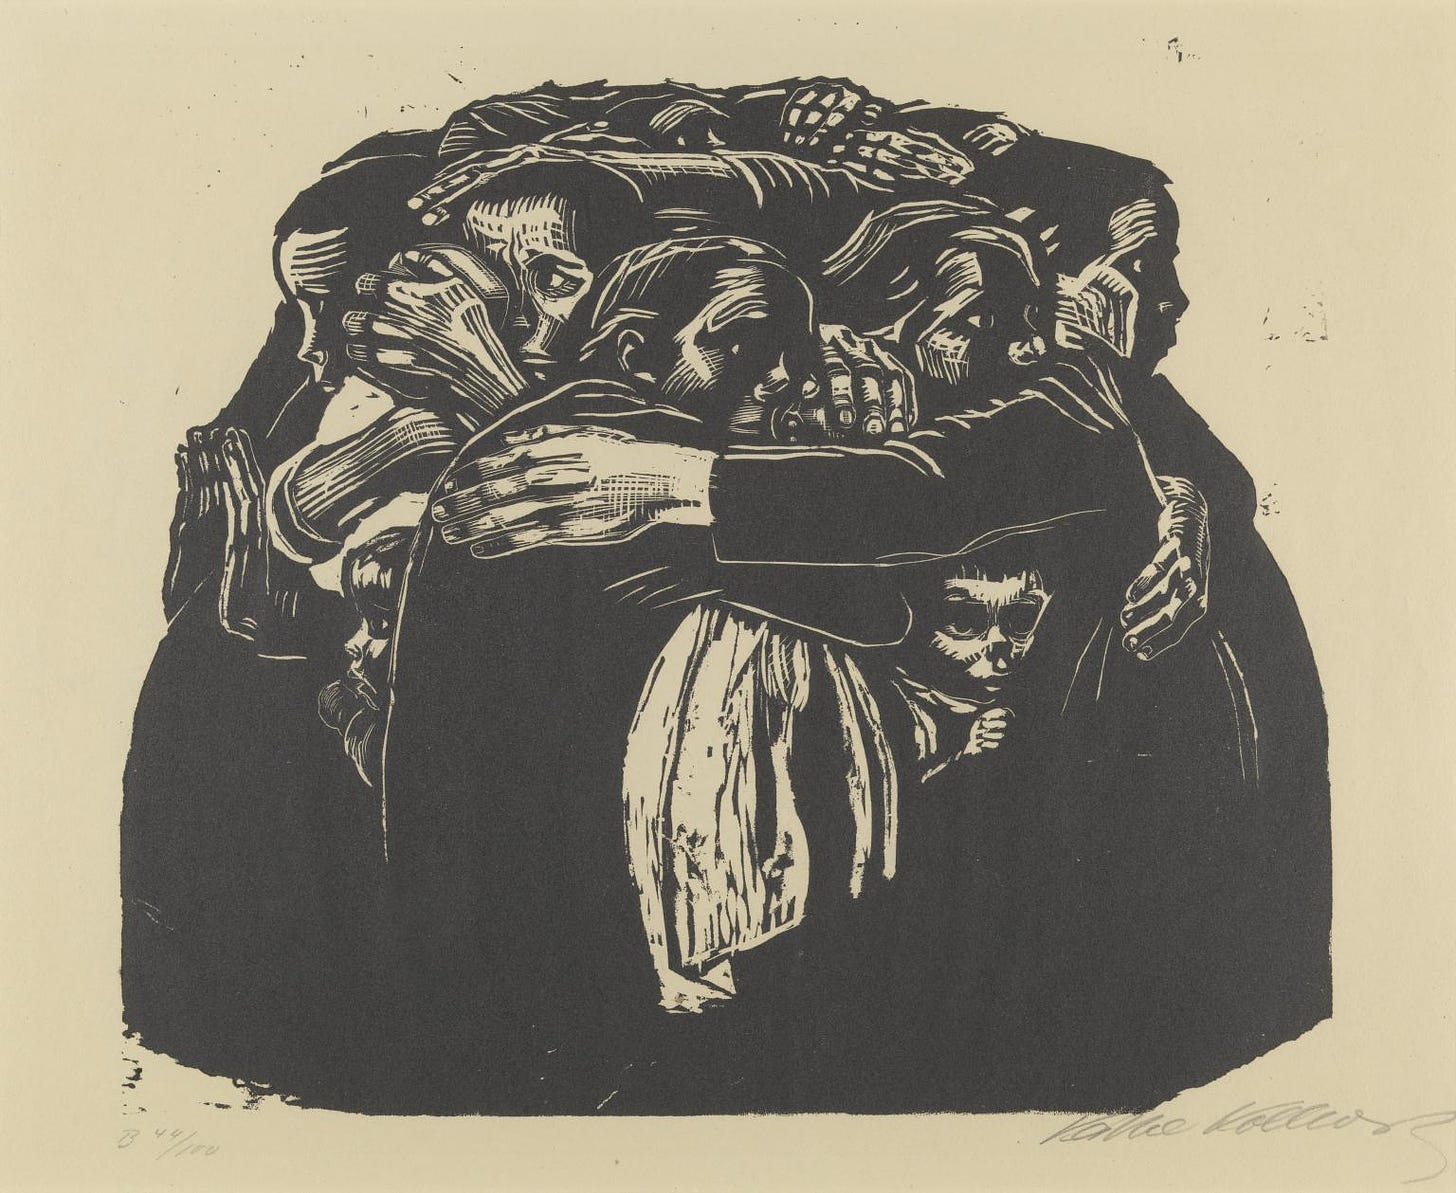 Woodcut image on tan paper of a group of women embracing, with one child seen peering out from within the group